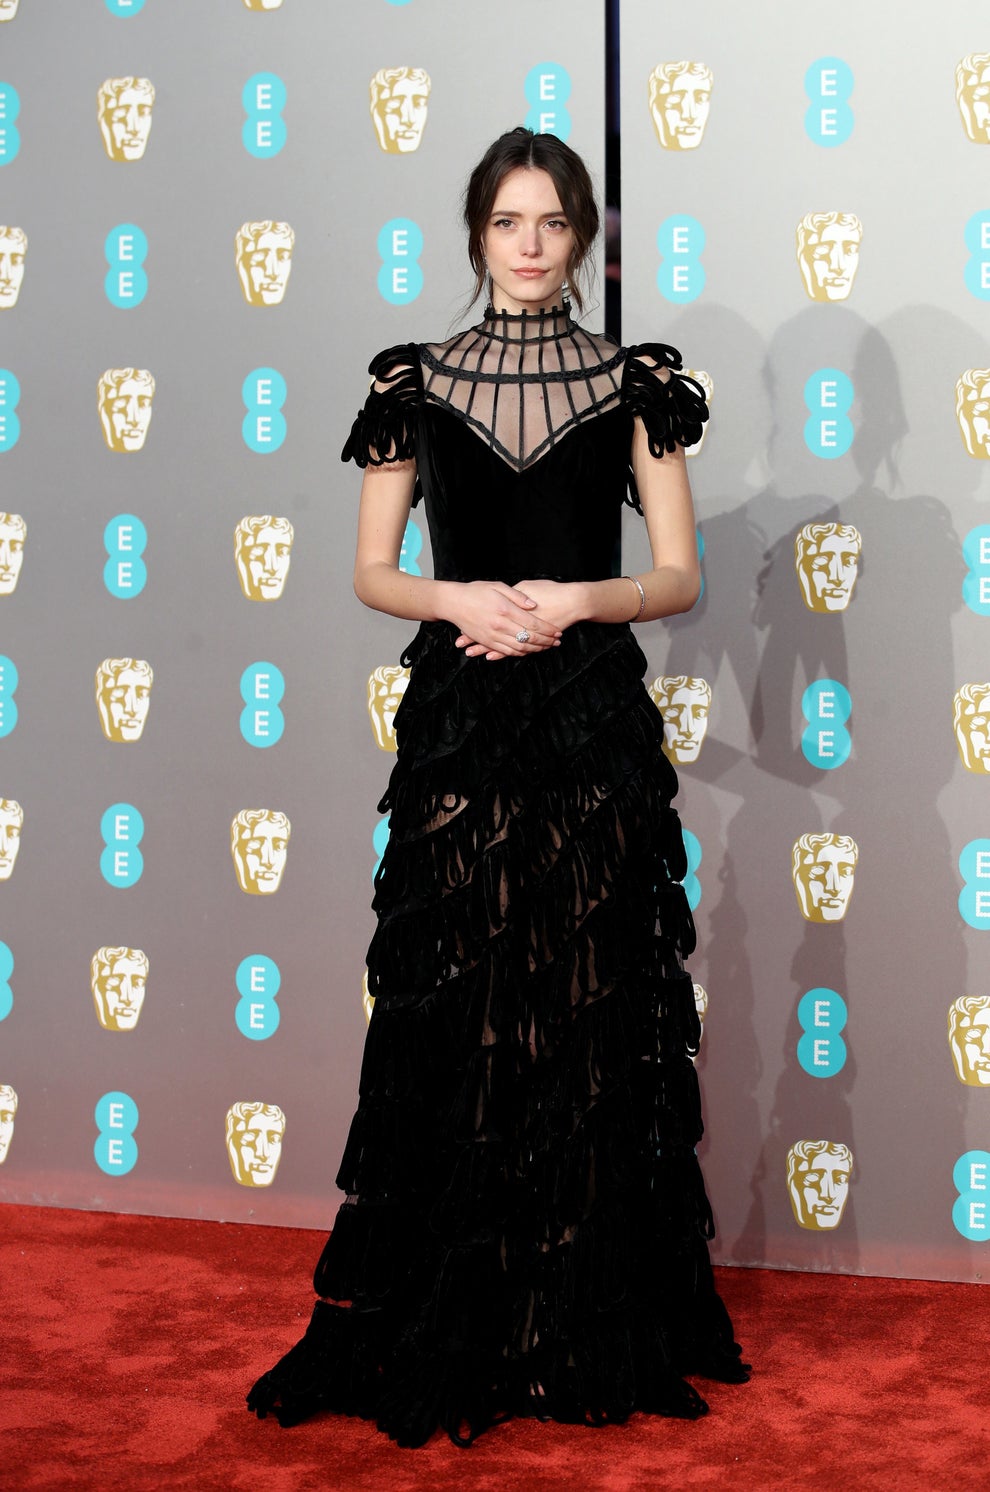 All The Celebrities Who Attended The BAFTAs 2019